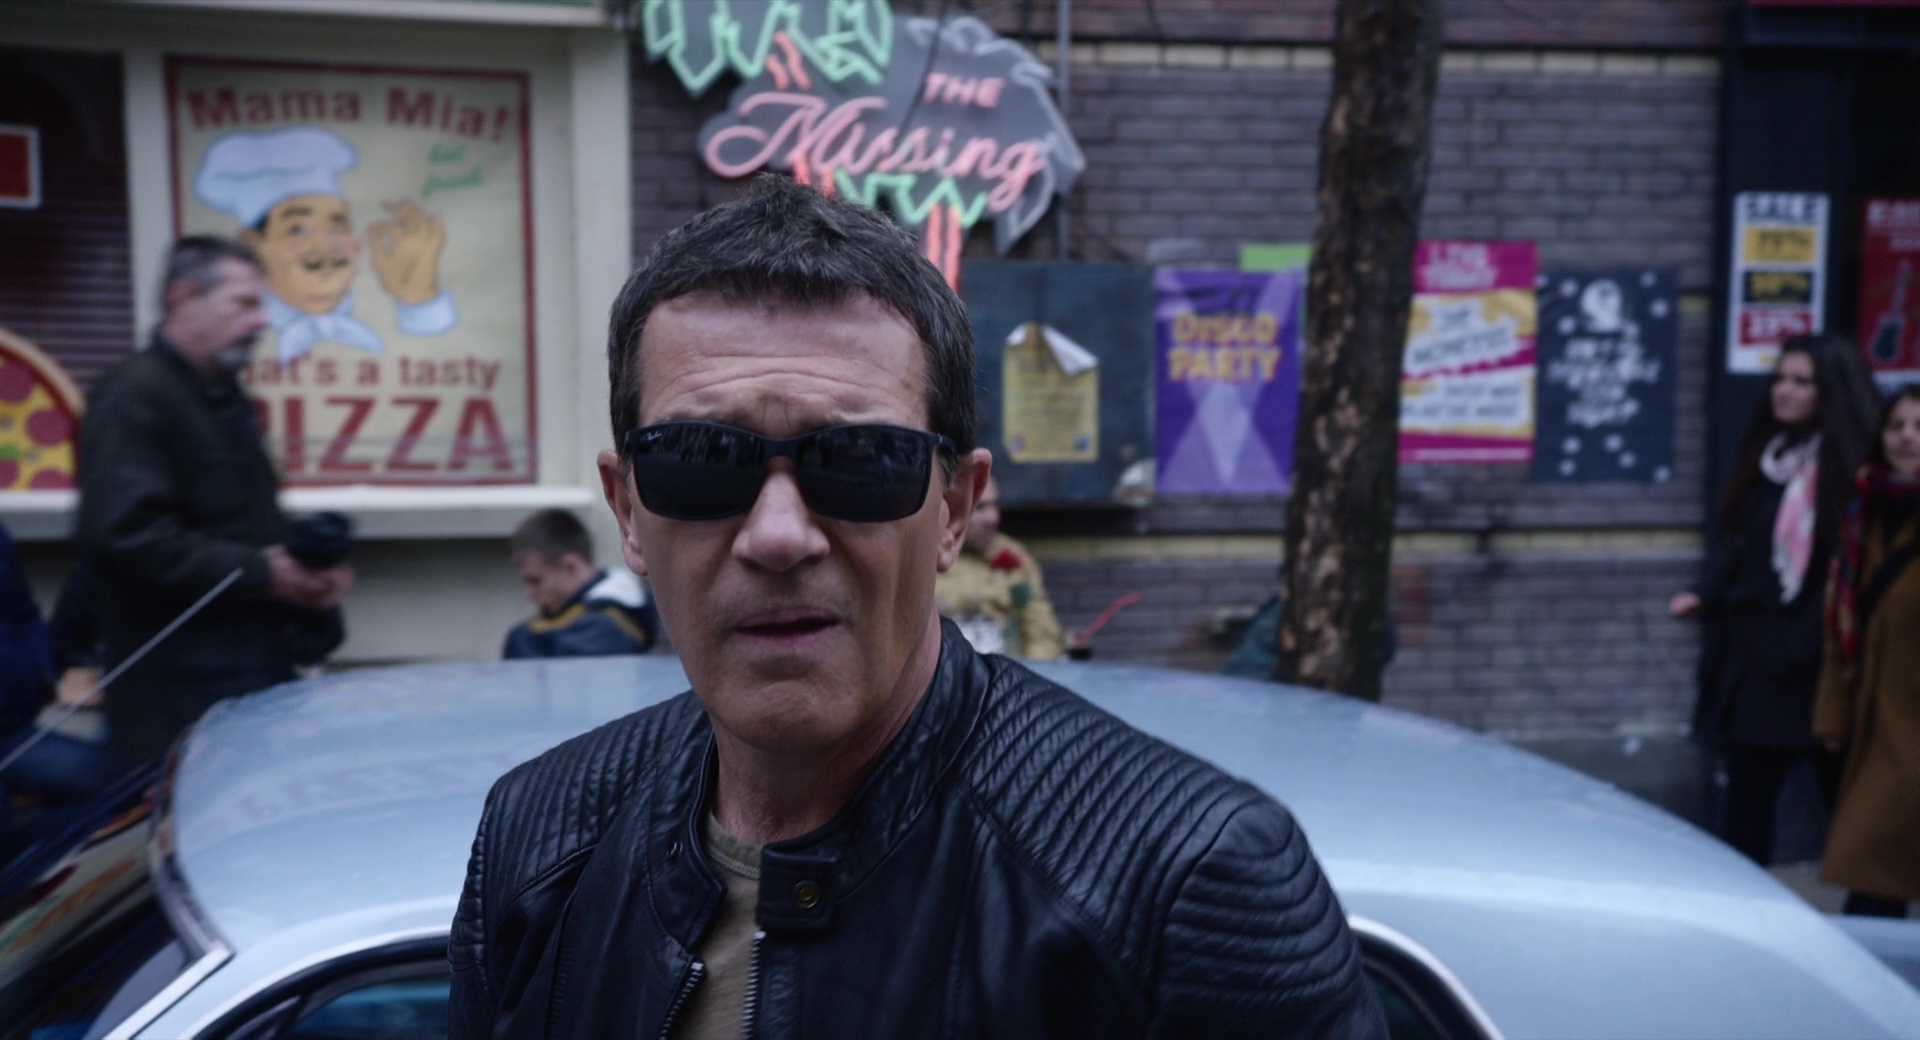 Ray-Ban Sunglasses Worn by Antonio Banderas in Acts Of Vengeance (2017) Movie1920 x 1040